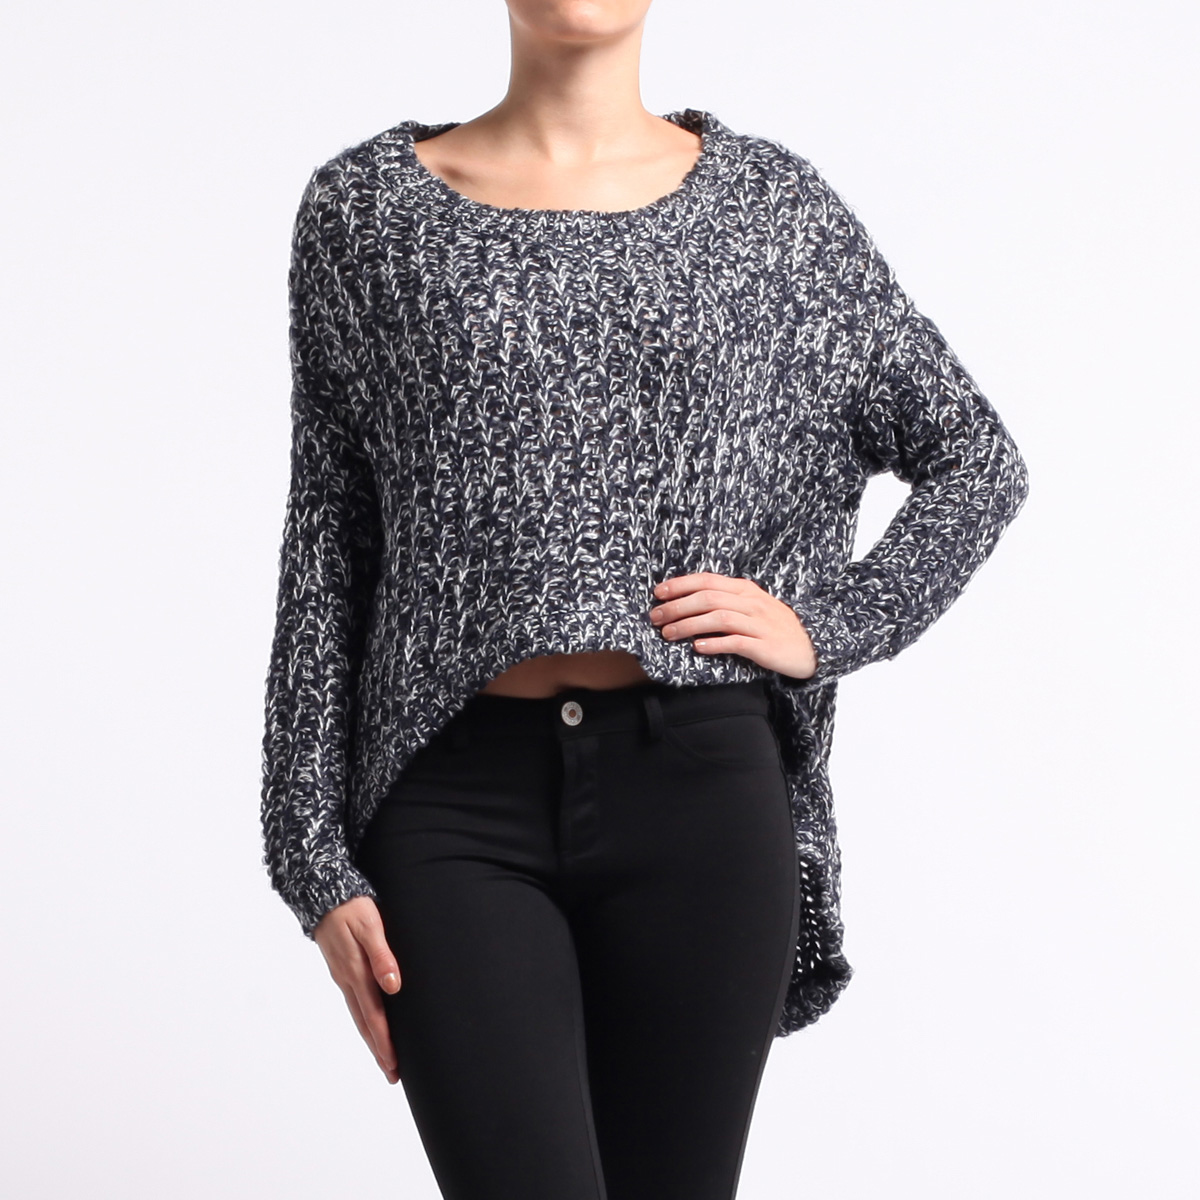 Loose Knit Sweater by Cecico